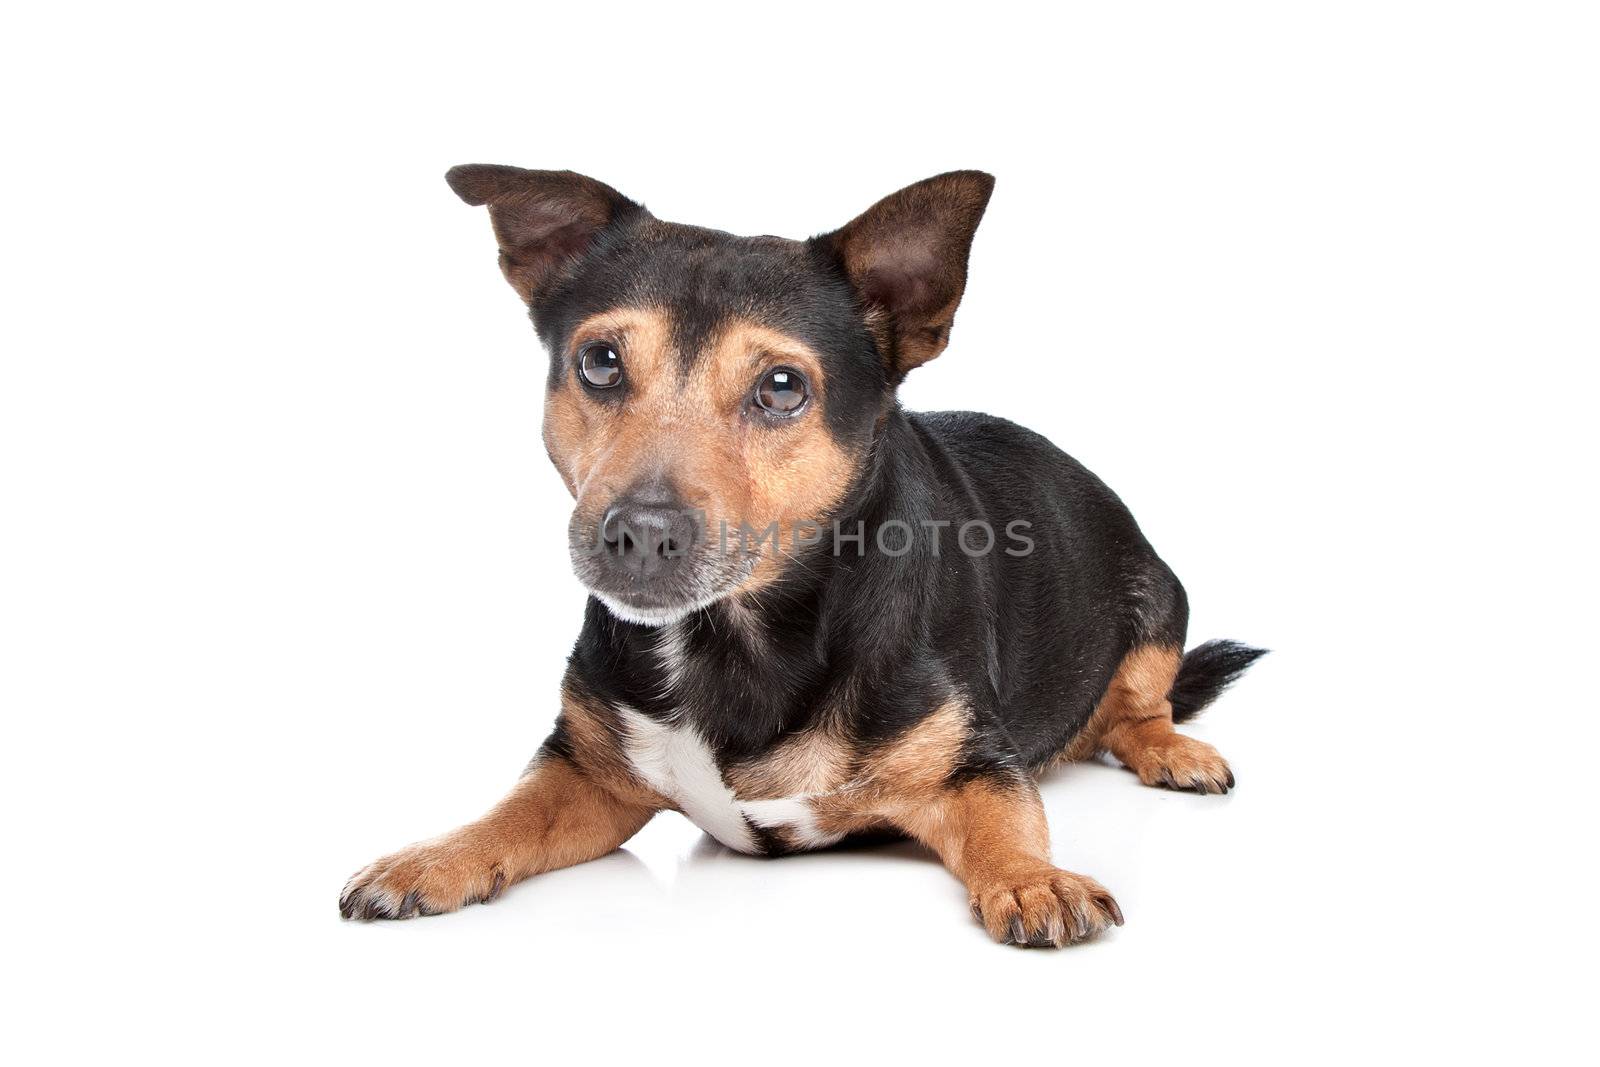 Black and Tan Jack Russel Terrier in front of white background